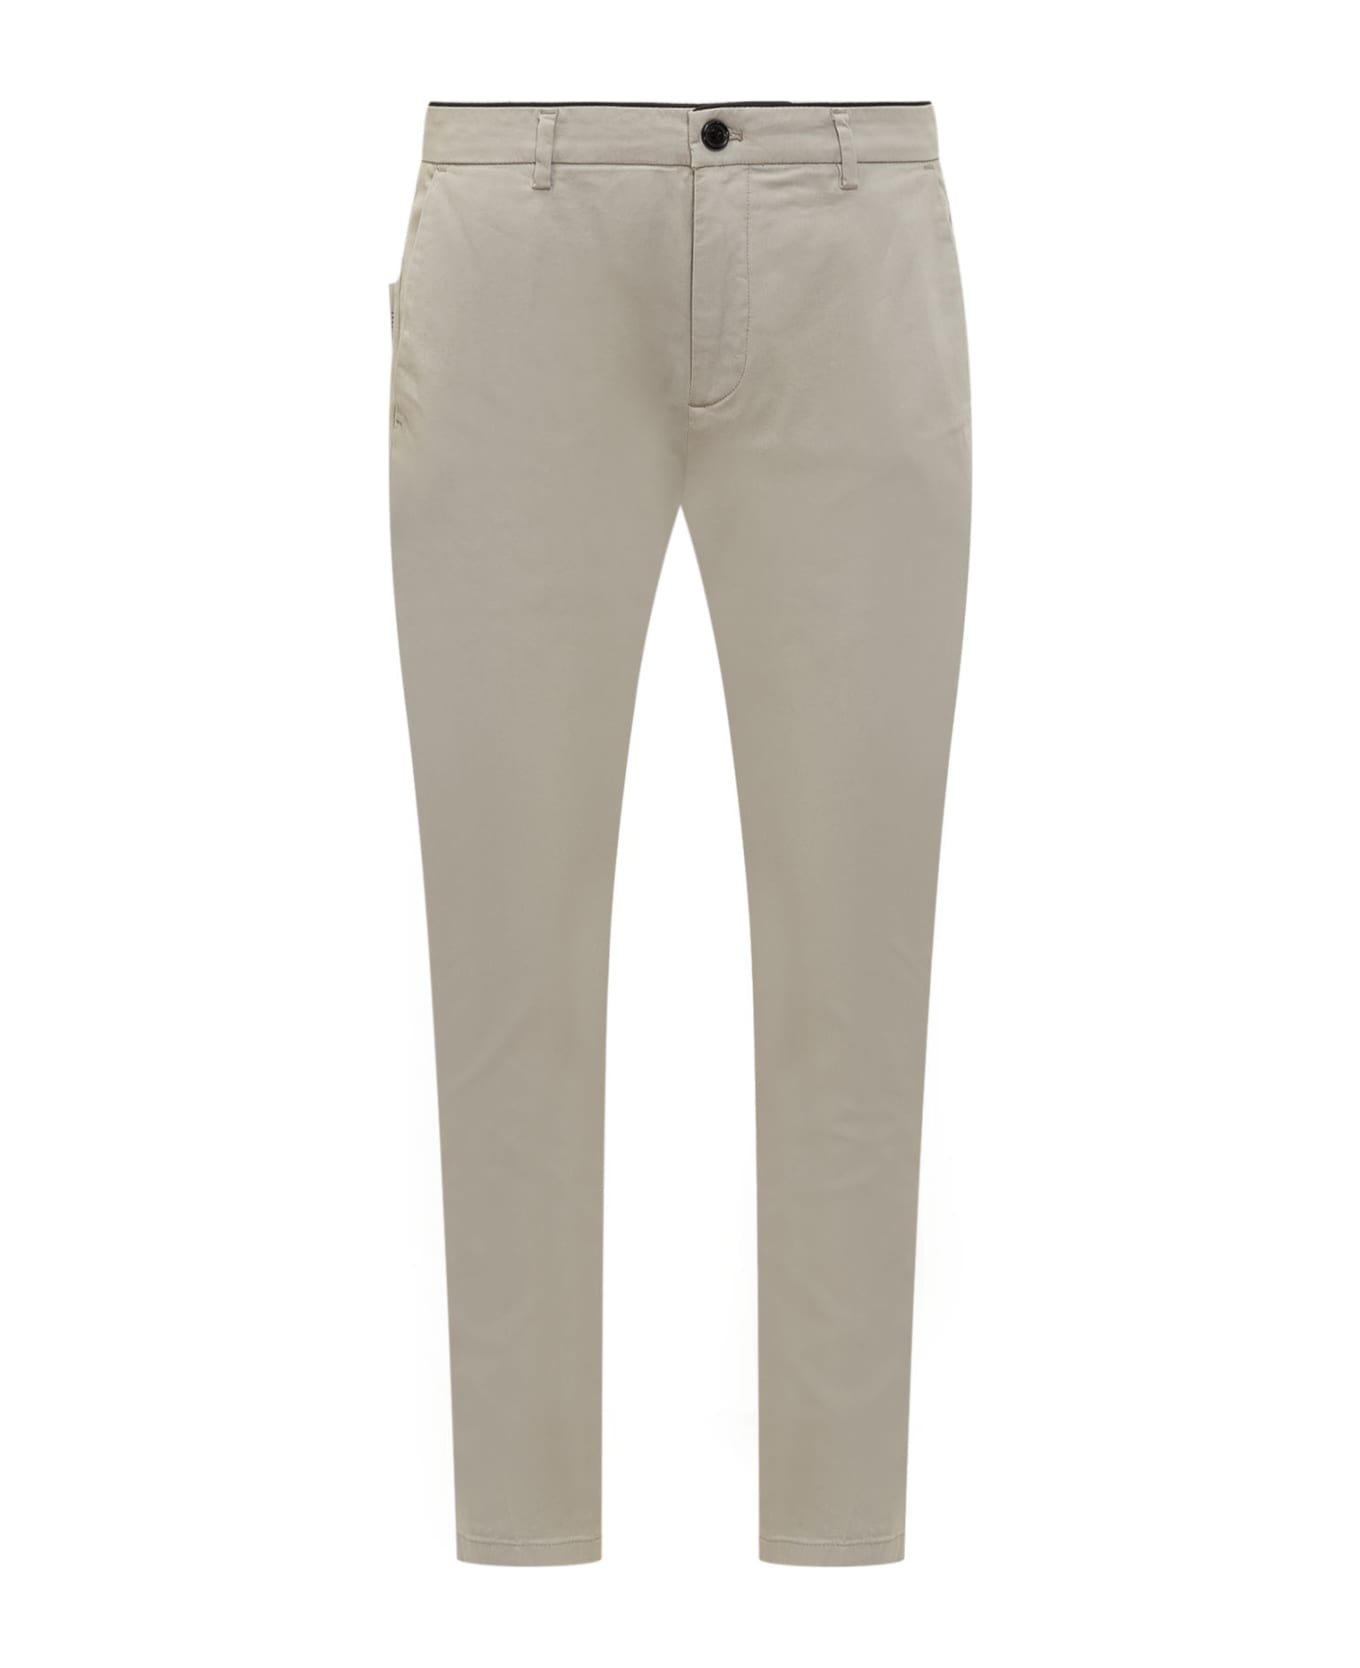 Department Five Prince Chinos Pants - STUCCO